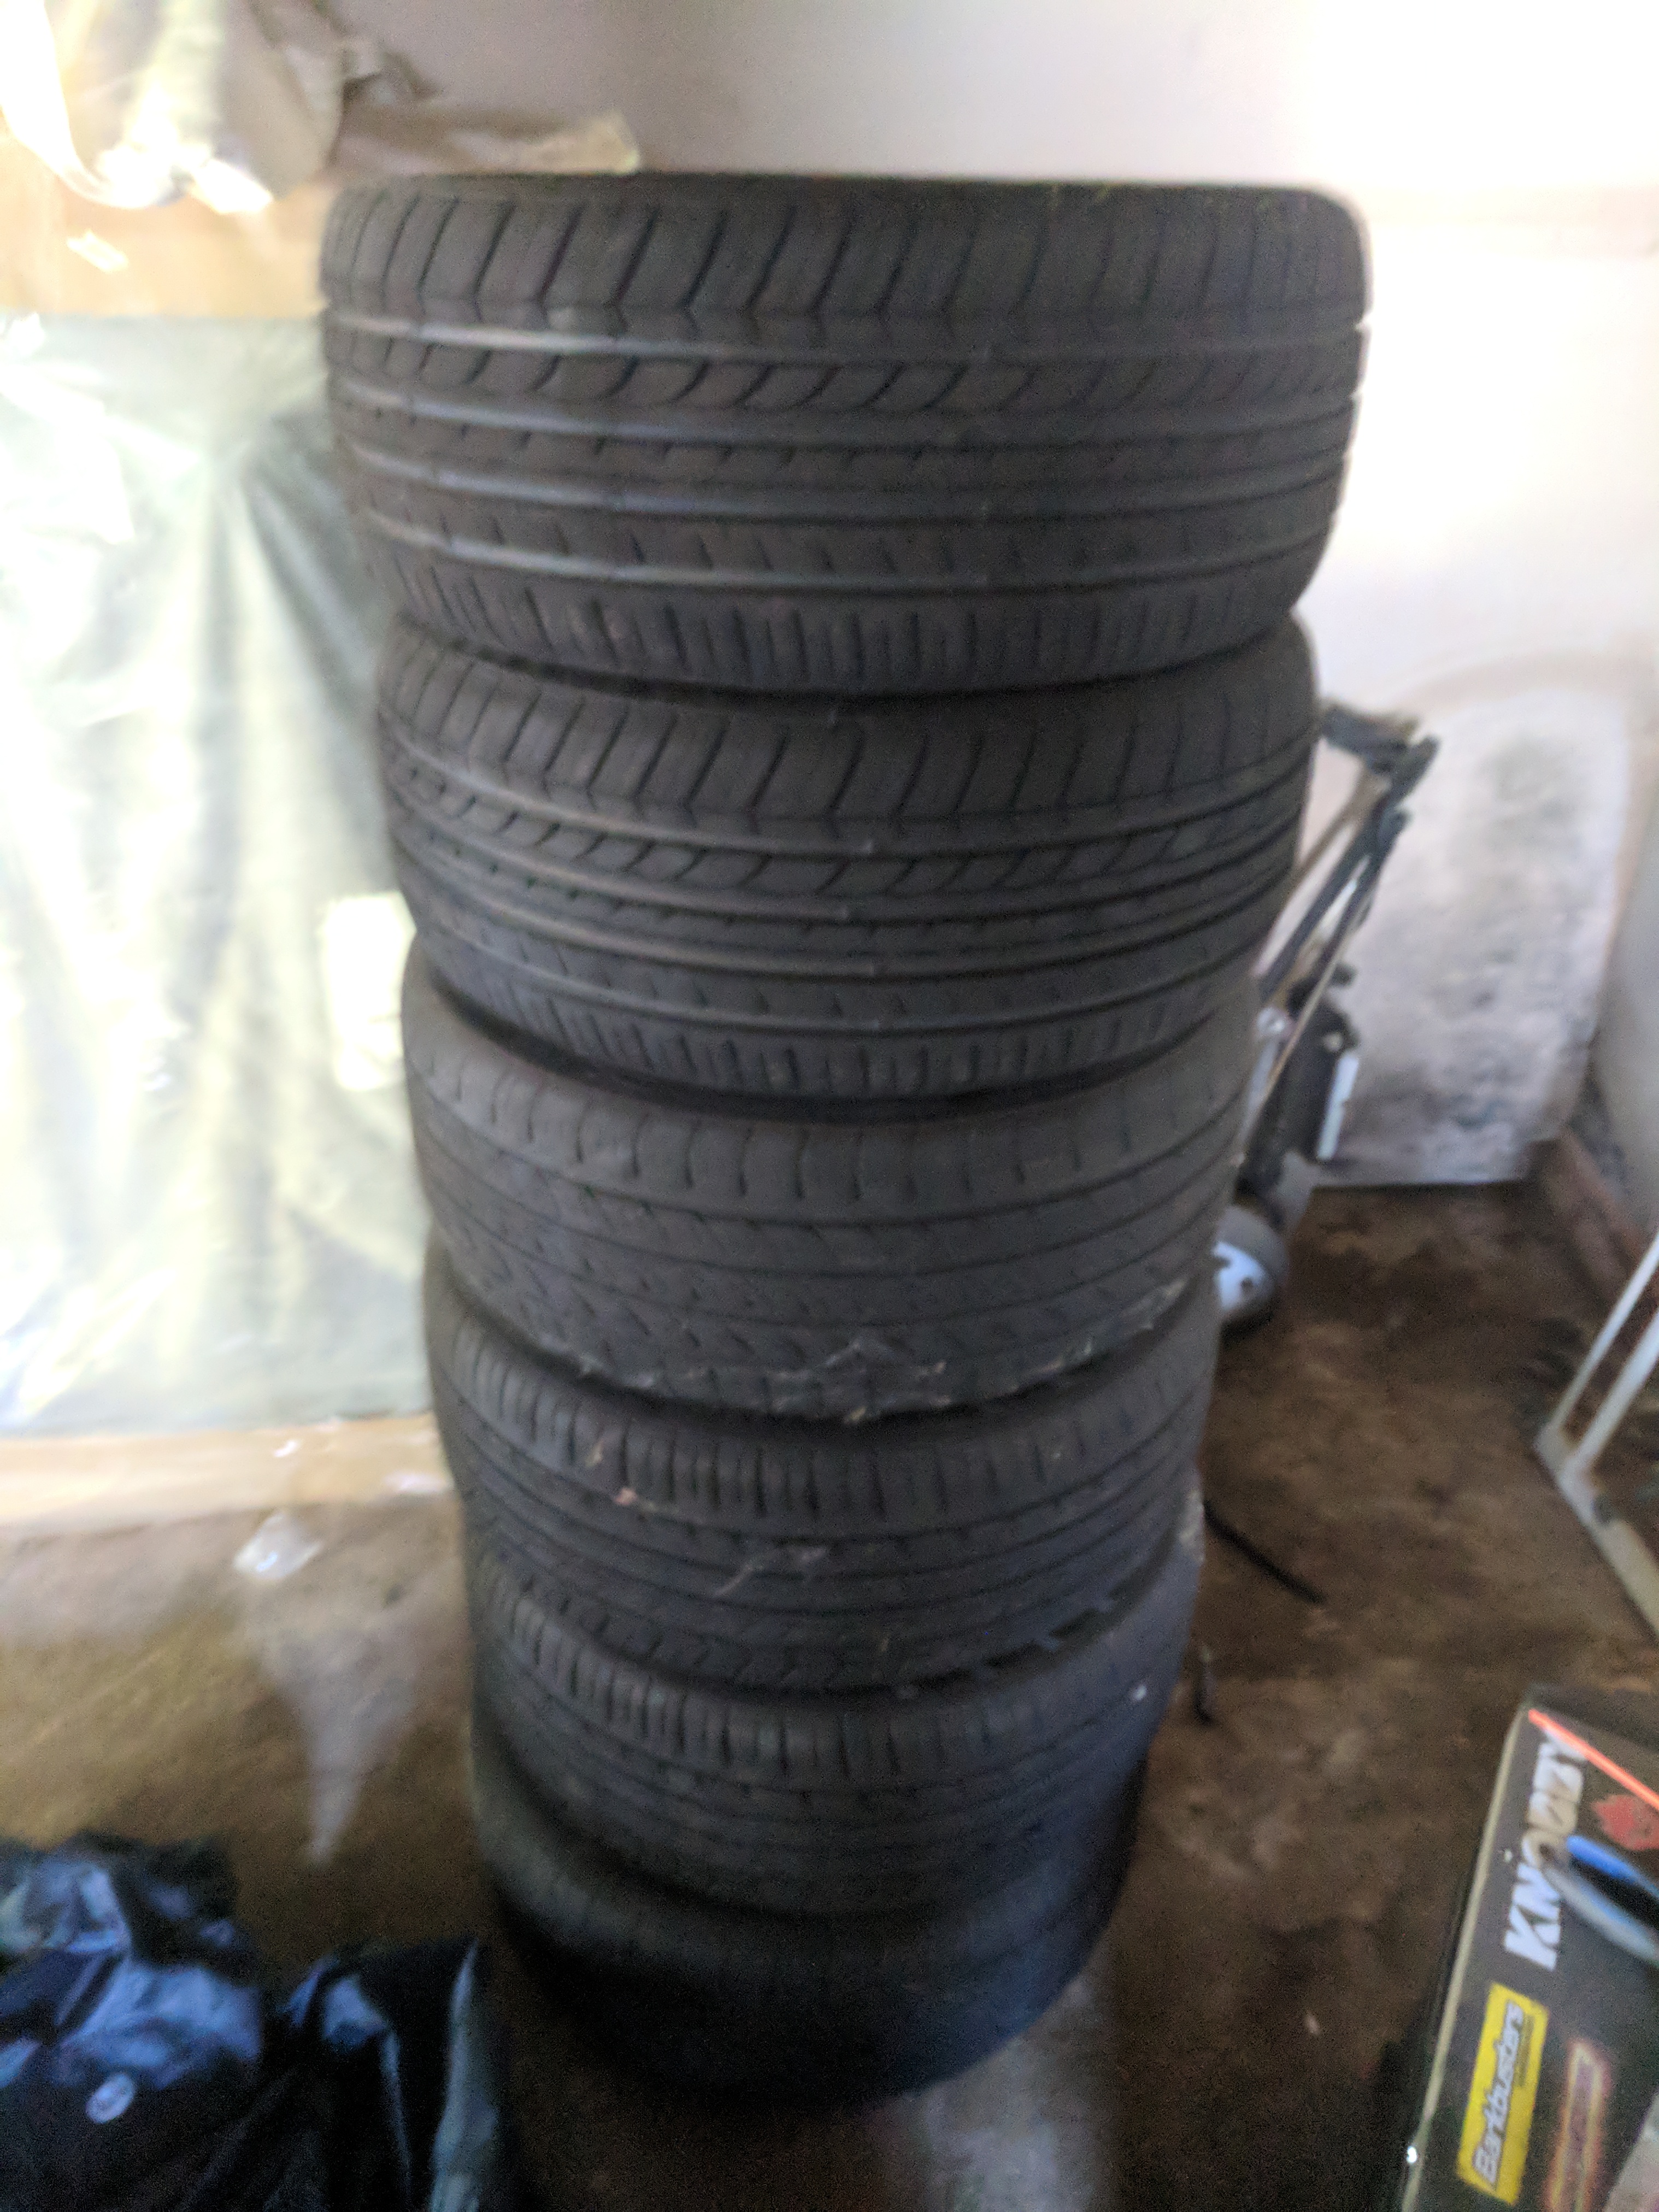 VY SV8 Rims and Tyres